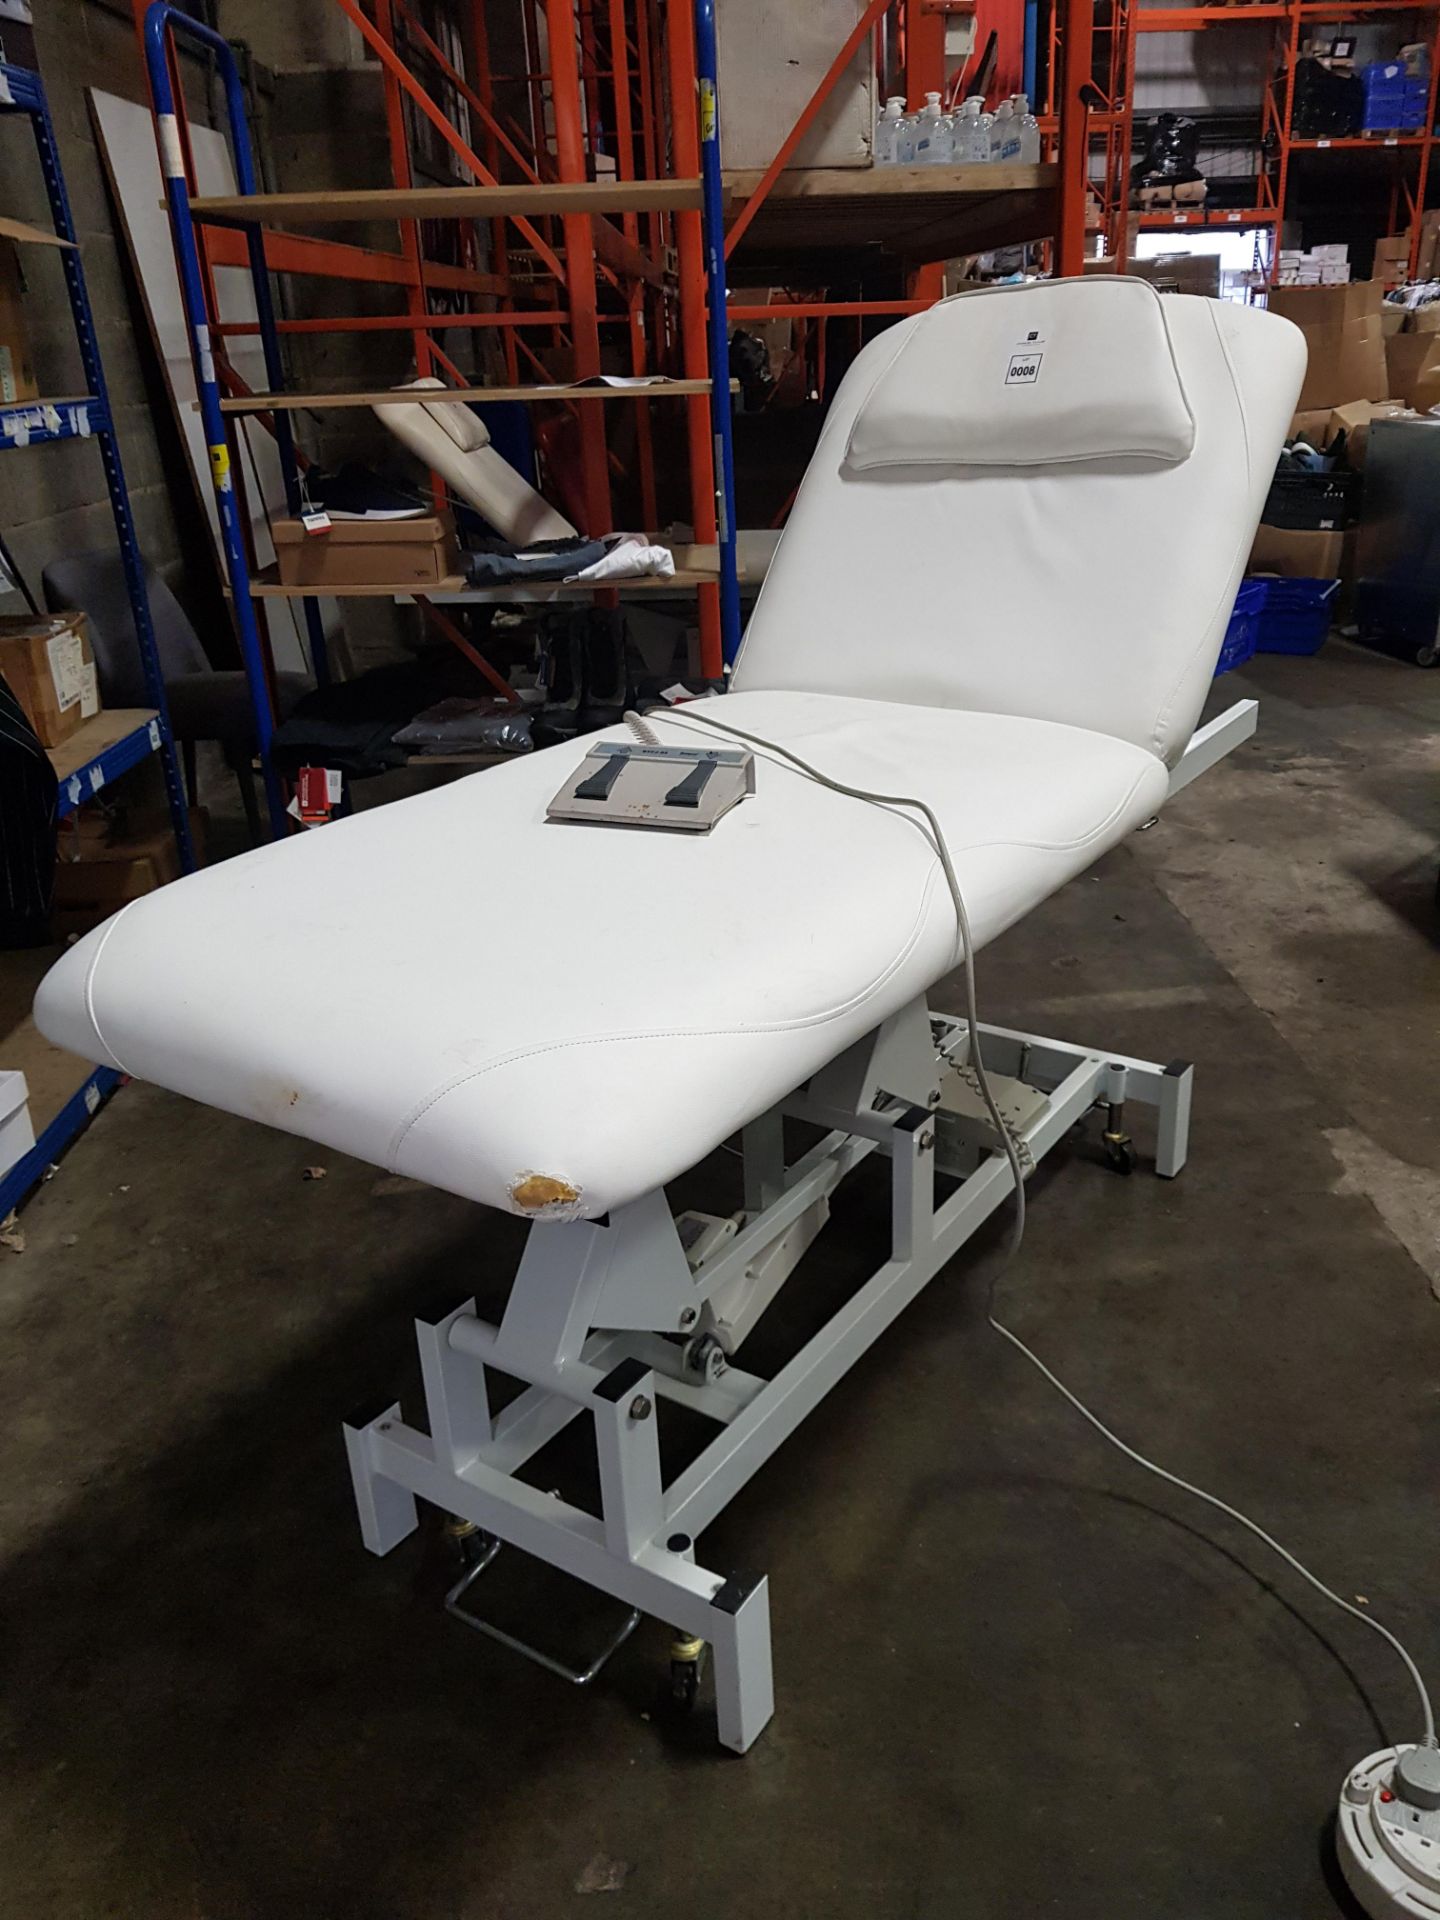 RUNYES RYFJ-05 ELECTRICAL MASSAGE BED (MINOR DAMAGE TO FOOT END)